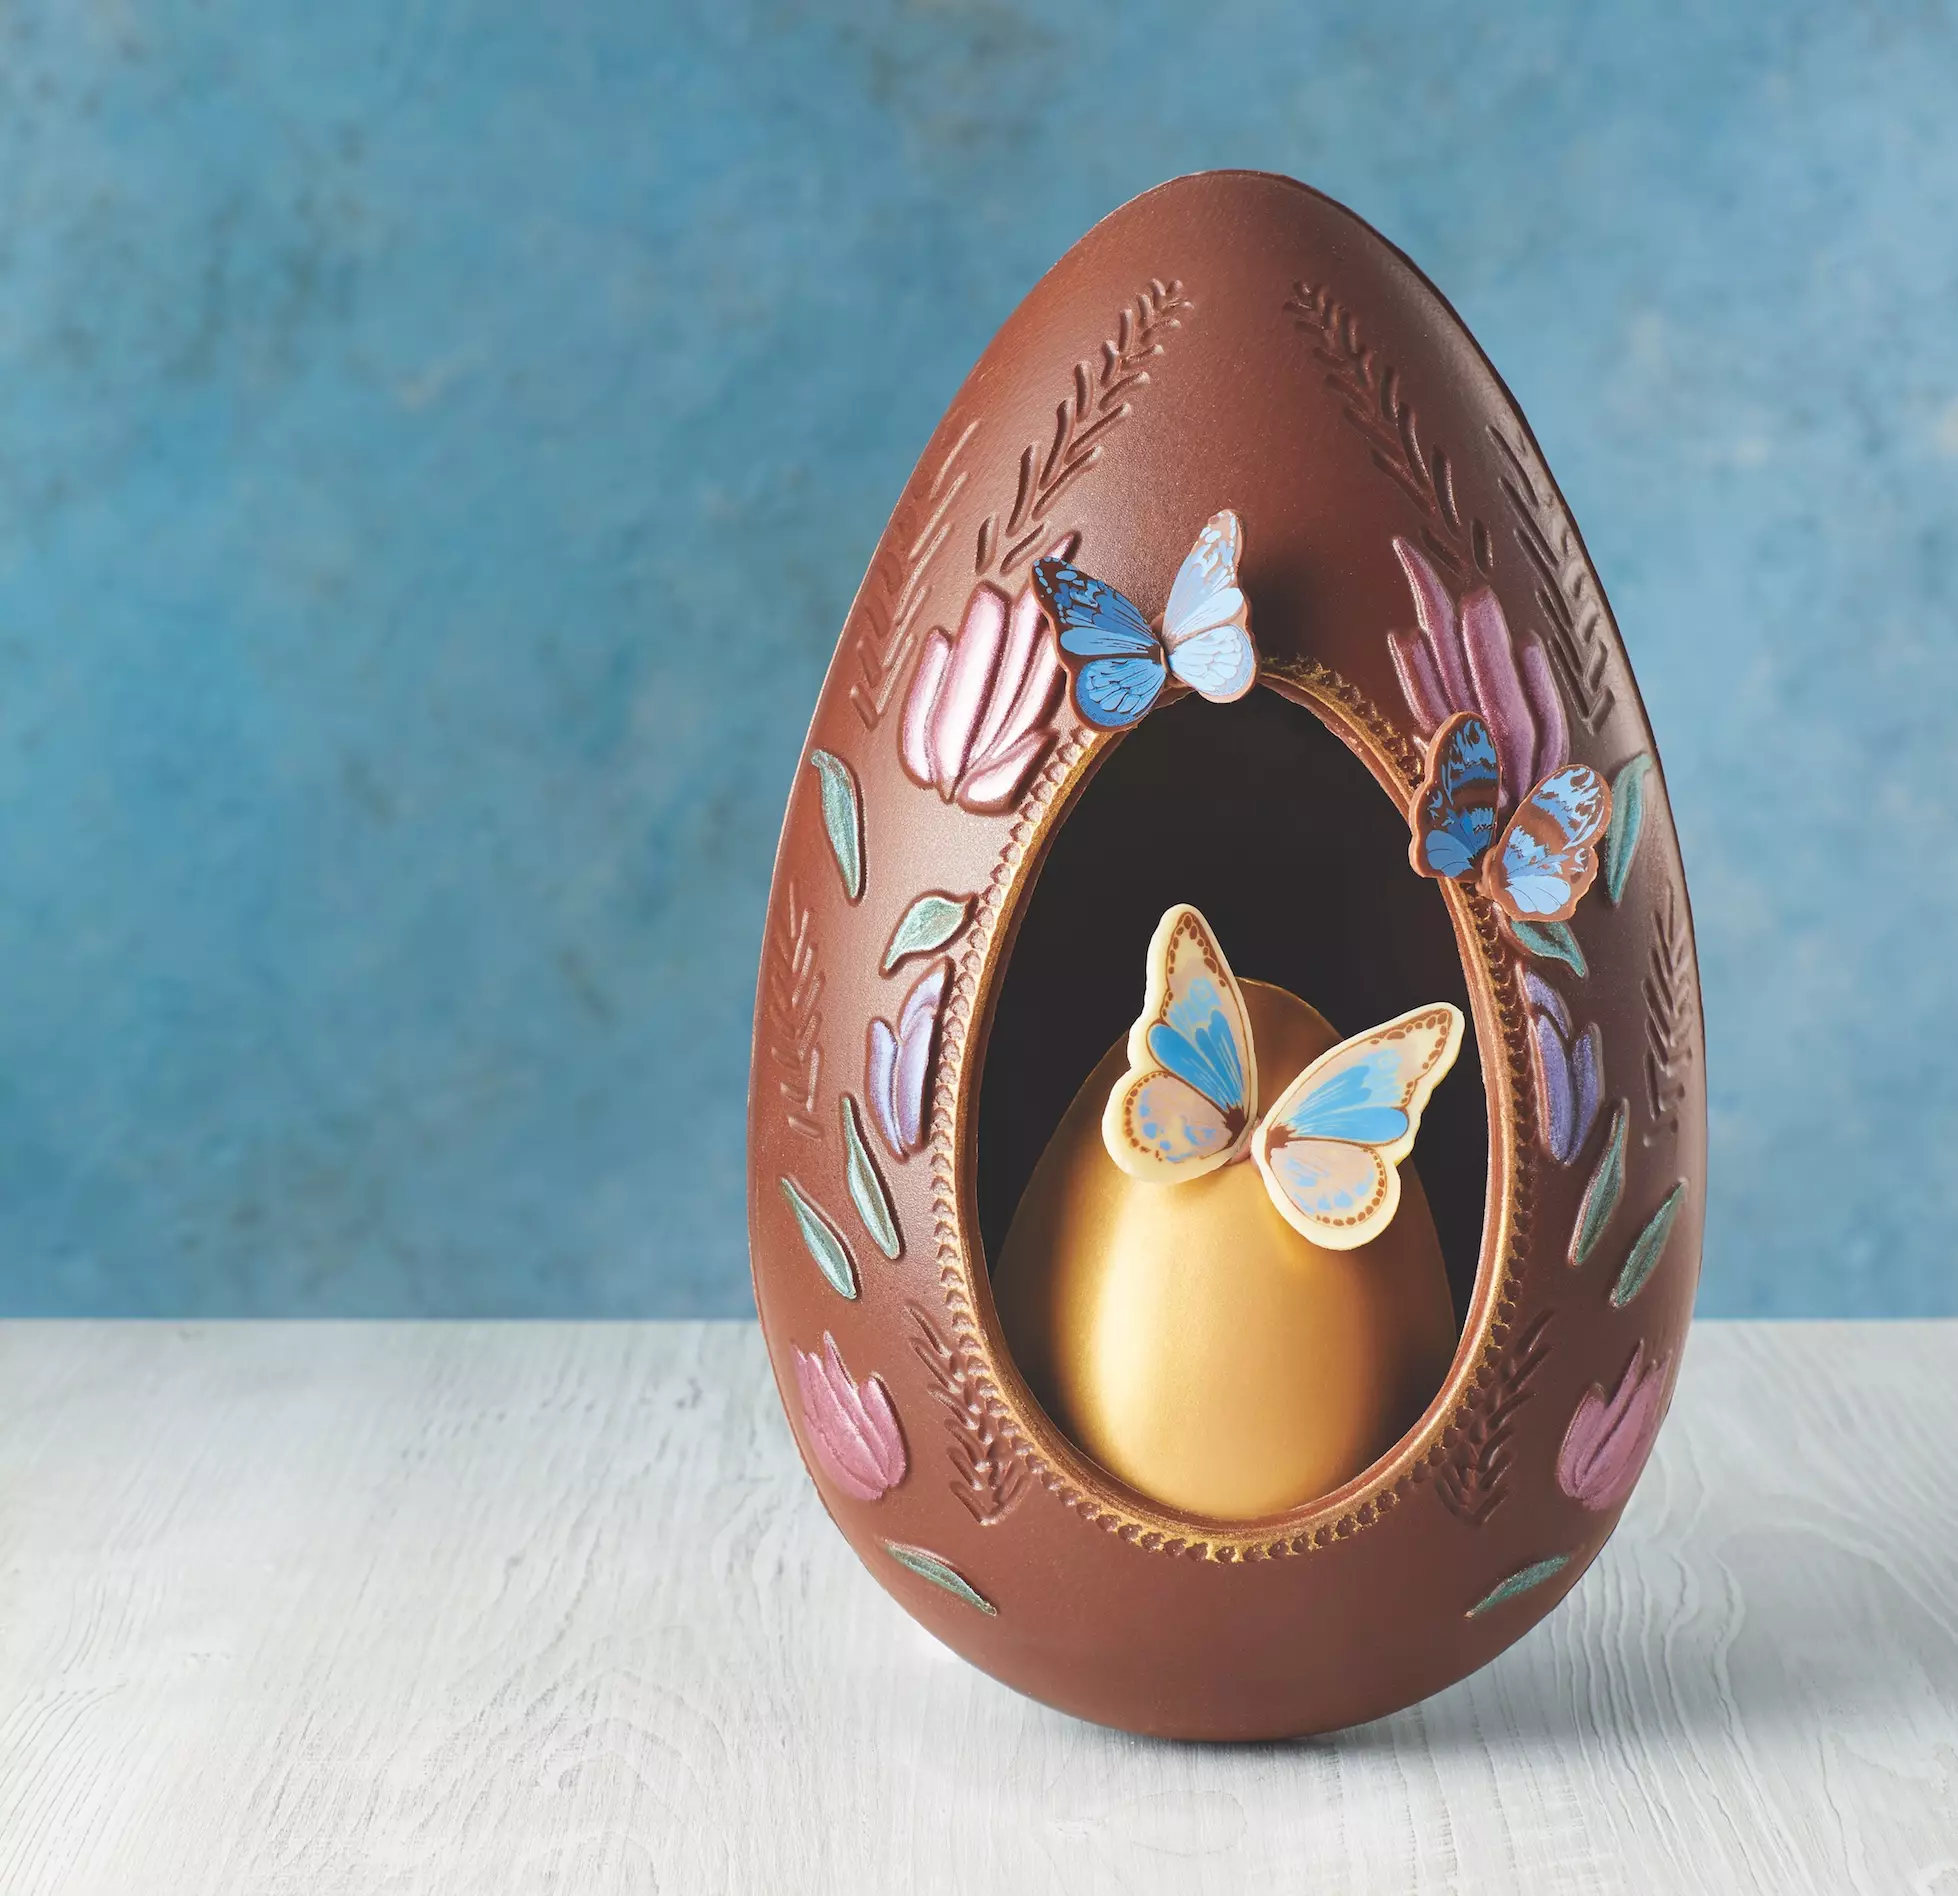 This egg is beautifully hand decorated with butterflies and has a second egg inside (